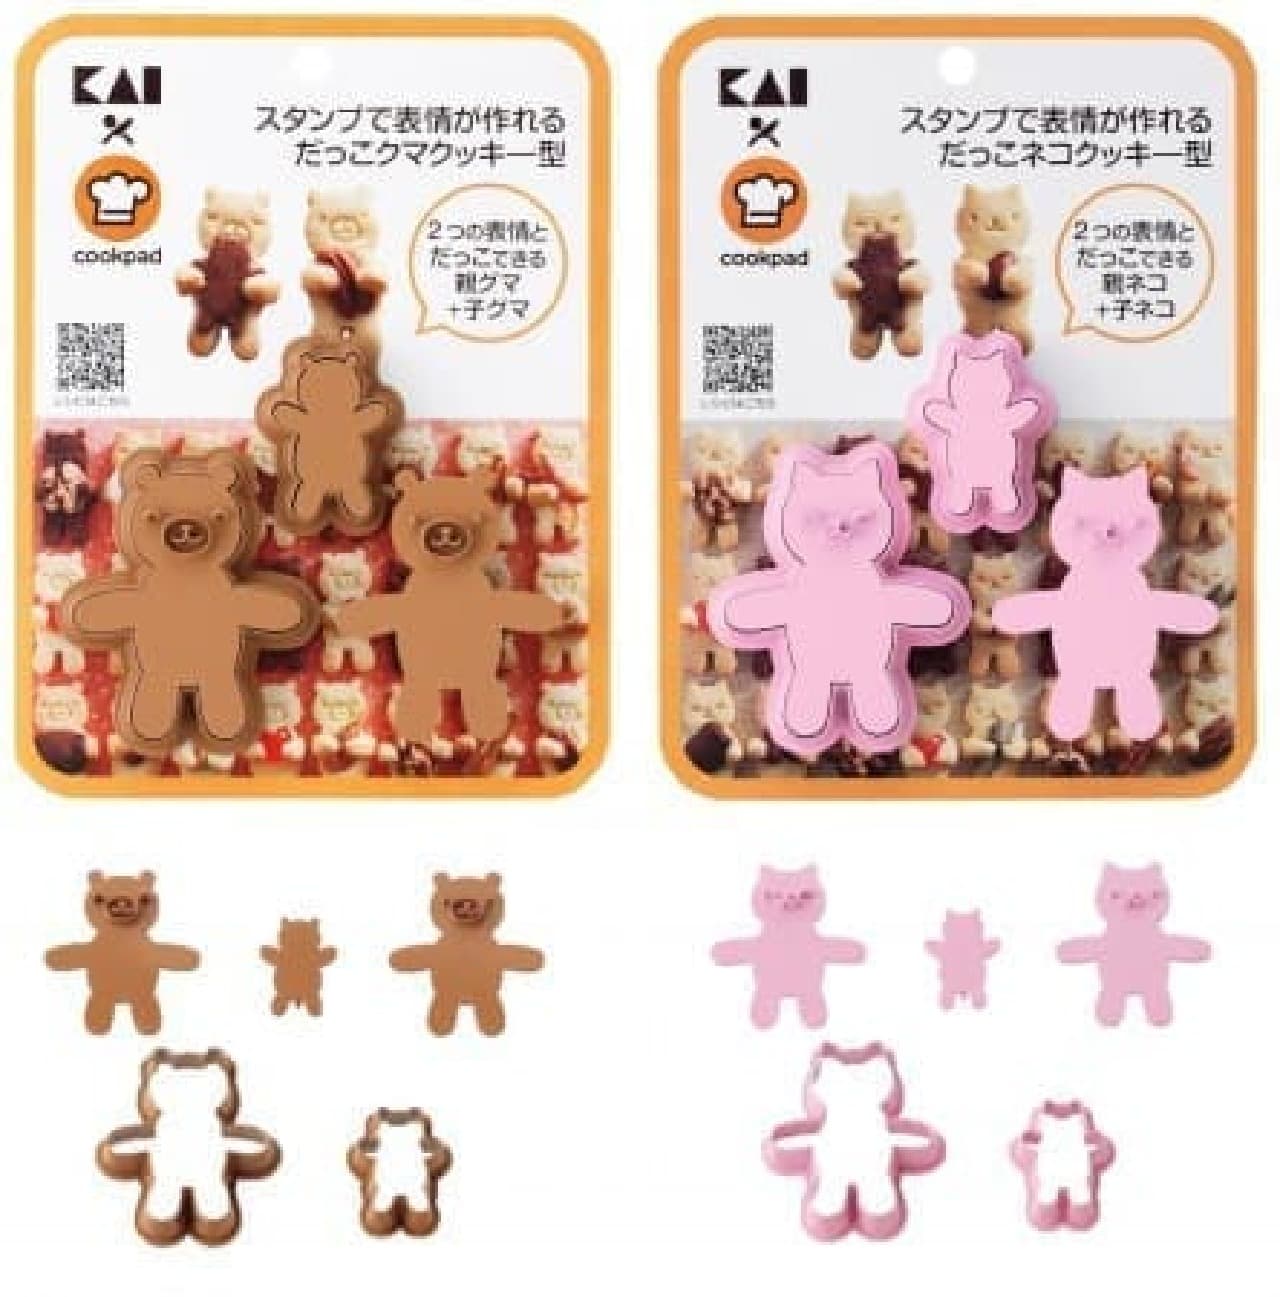 Dako bear cookie type that you can make facial expressions with stamps